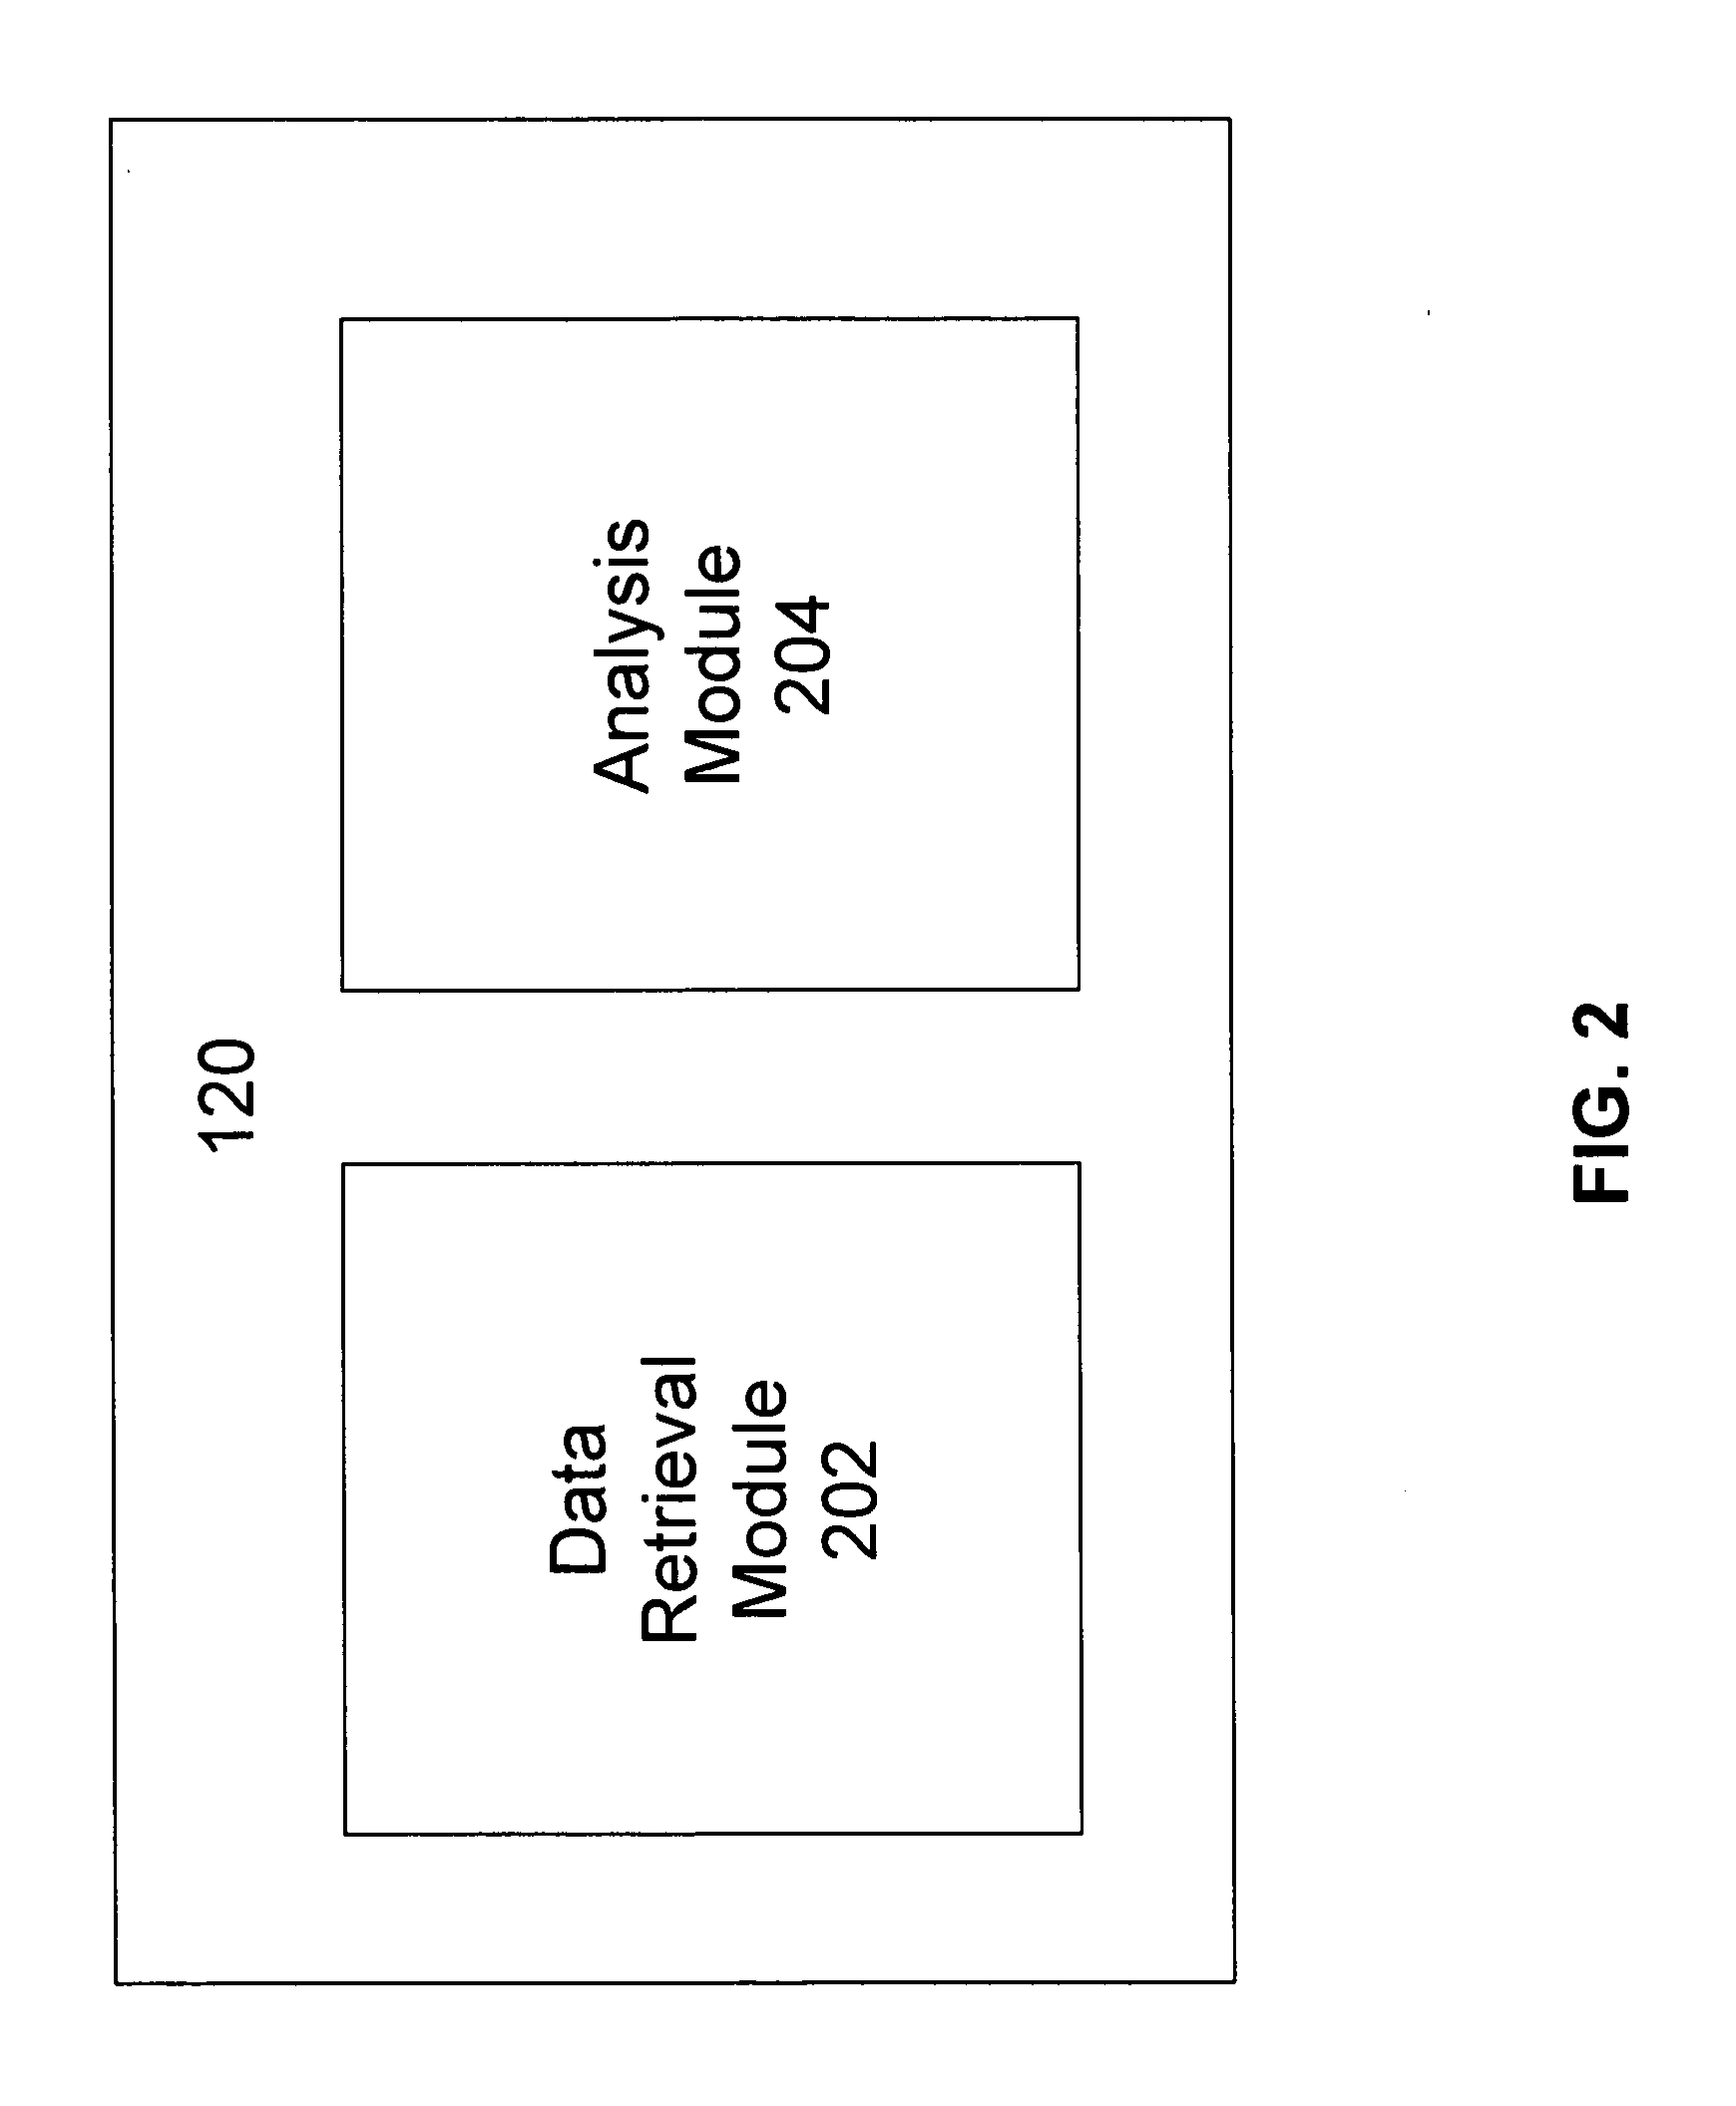 System and method for analyzing medical images